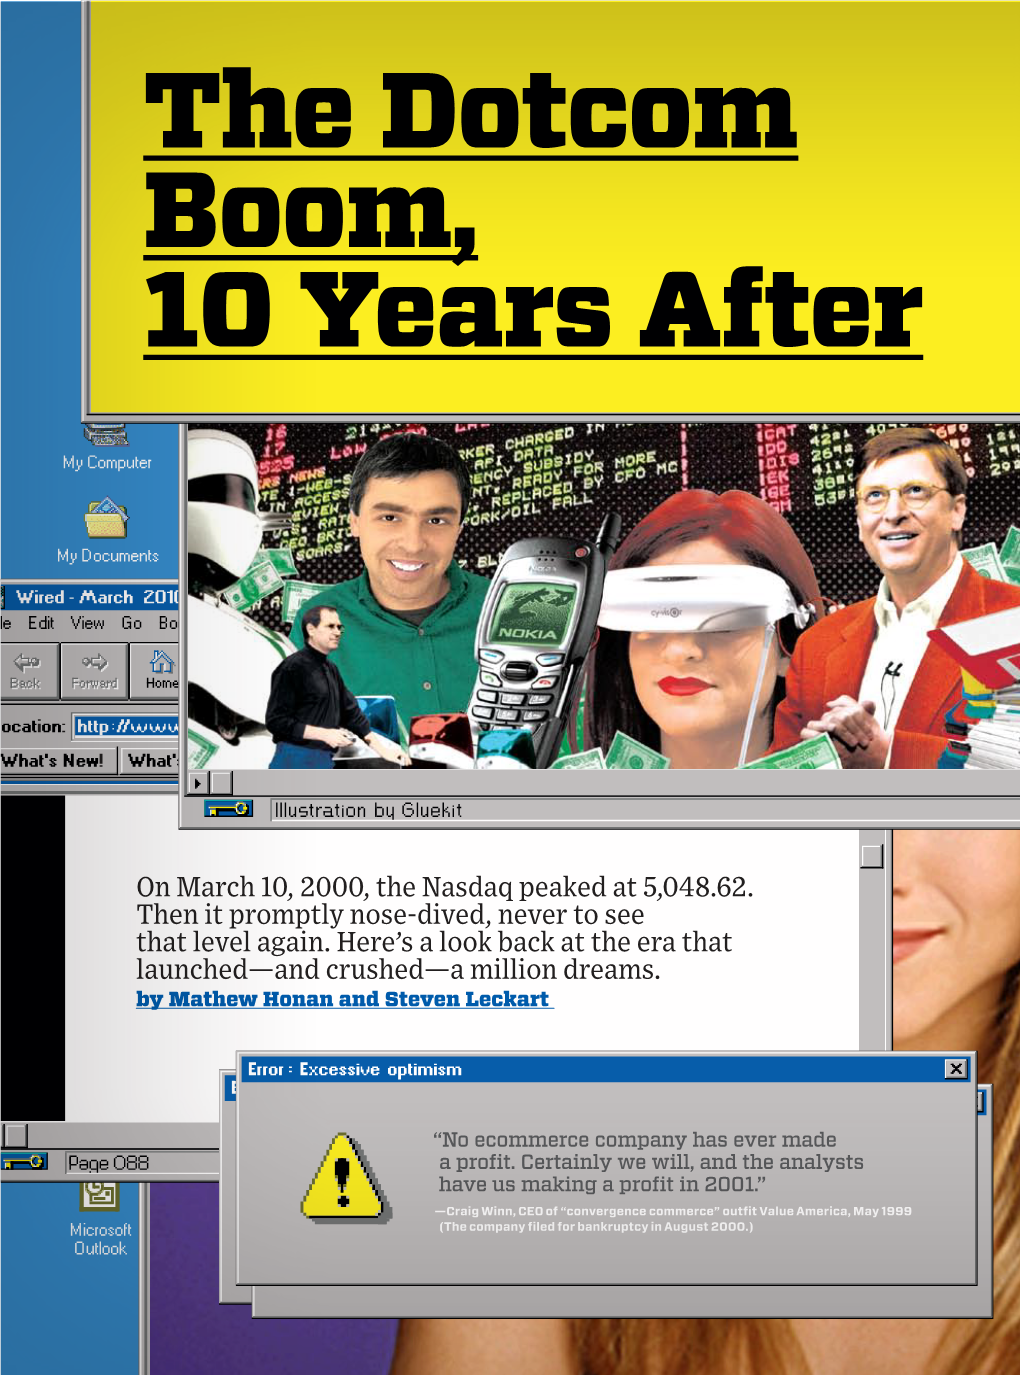 The Dotcom Boom, 10 Years After